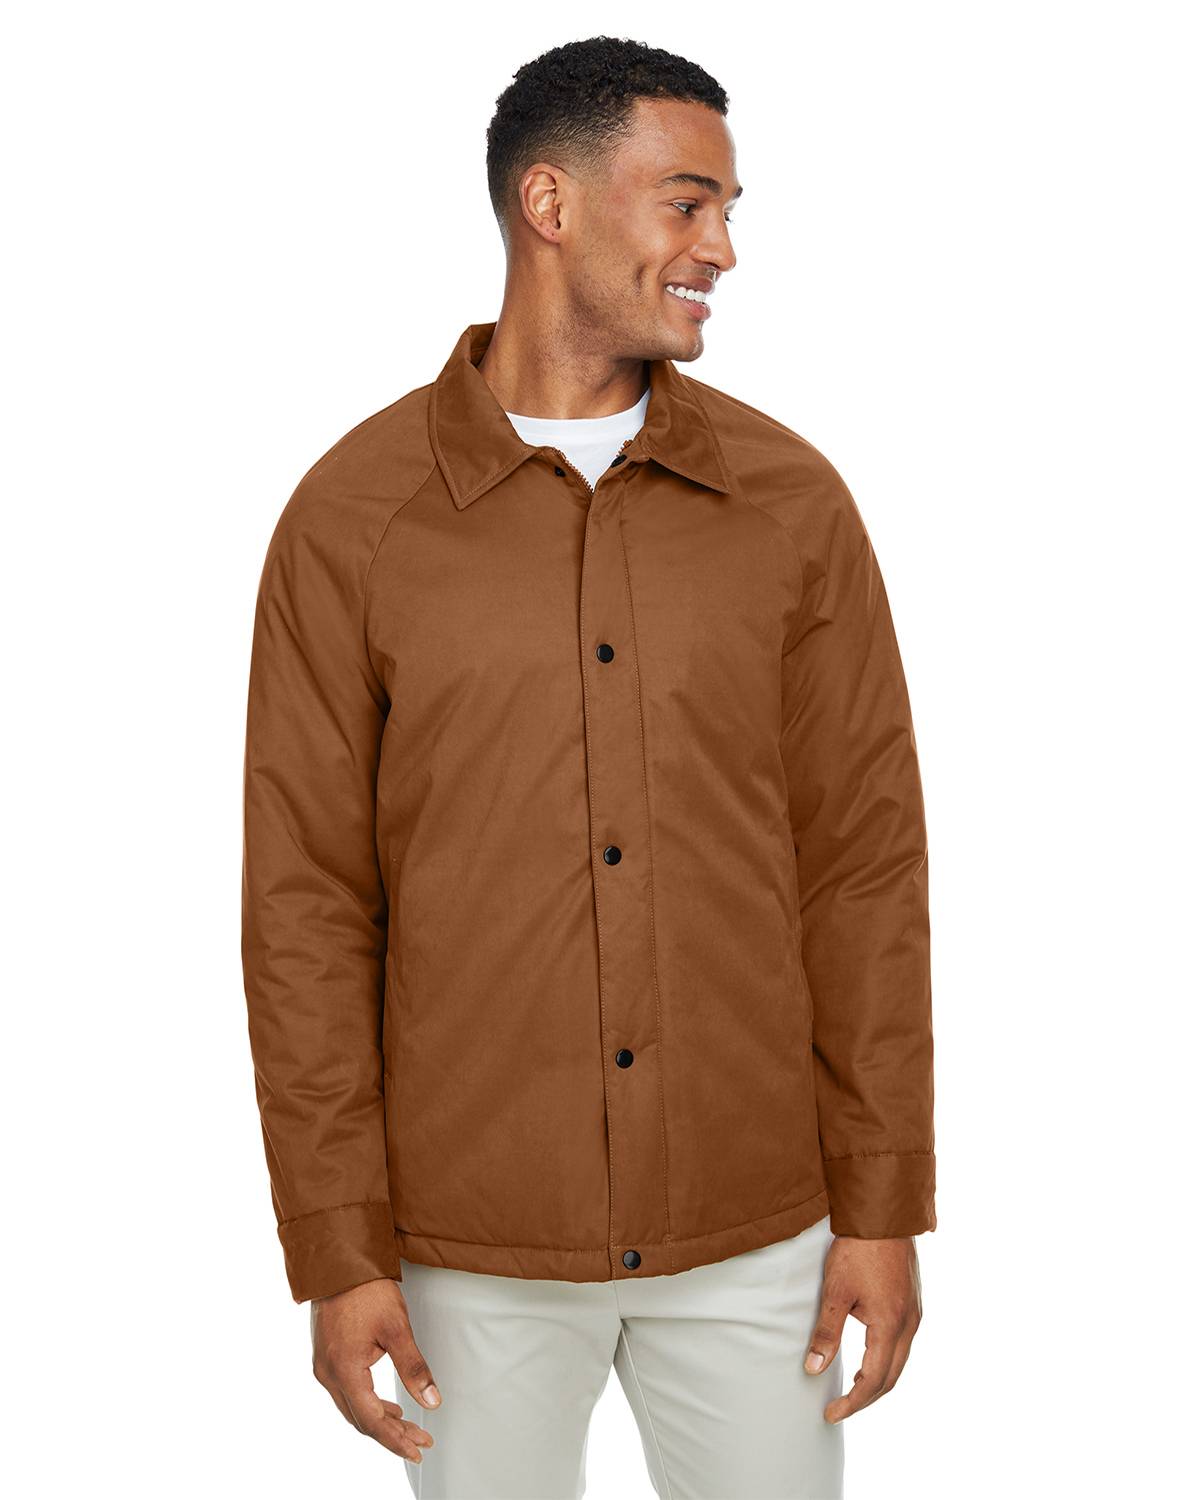 North End NE720 Adult Apex Coach Jacket - Free Shipping Available